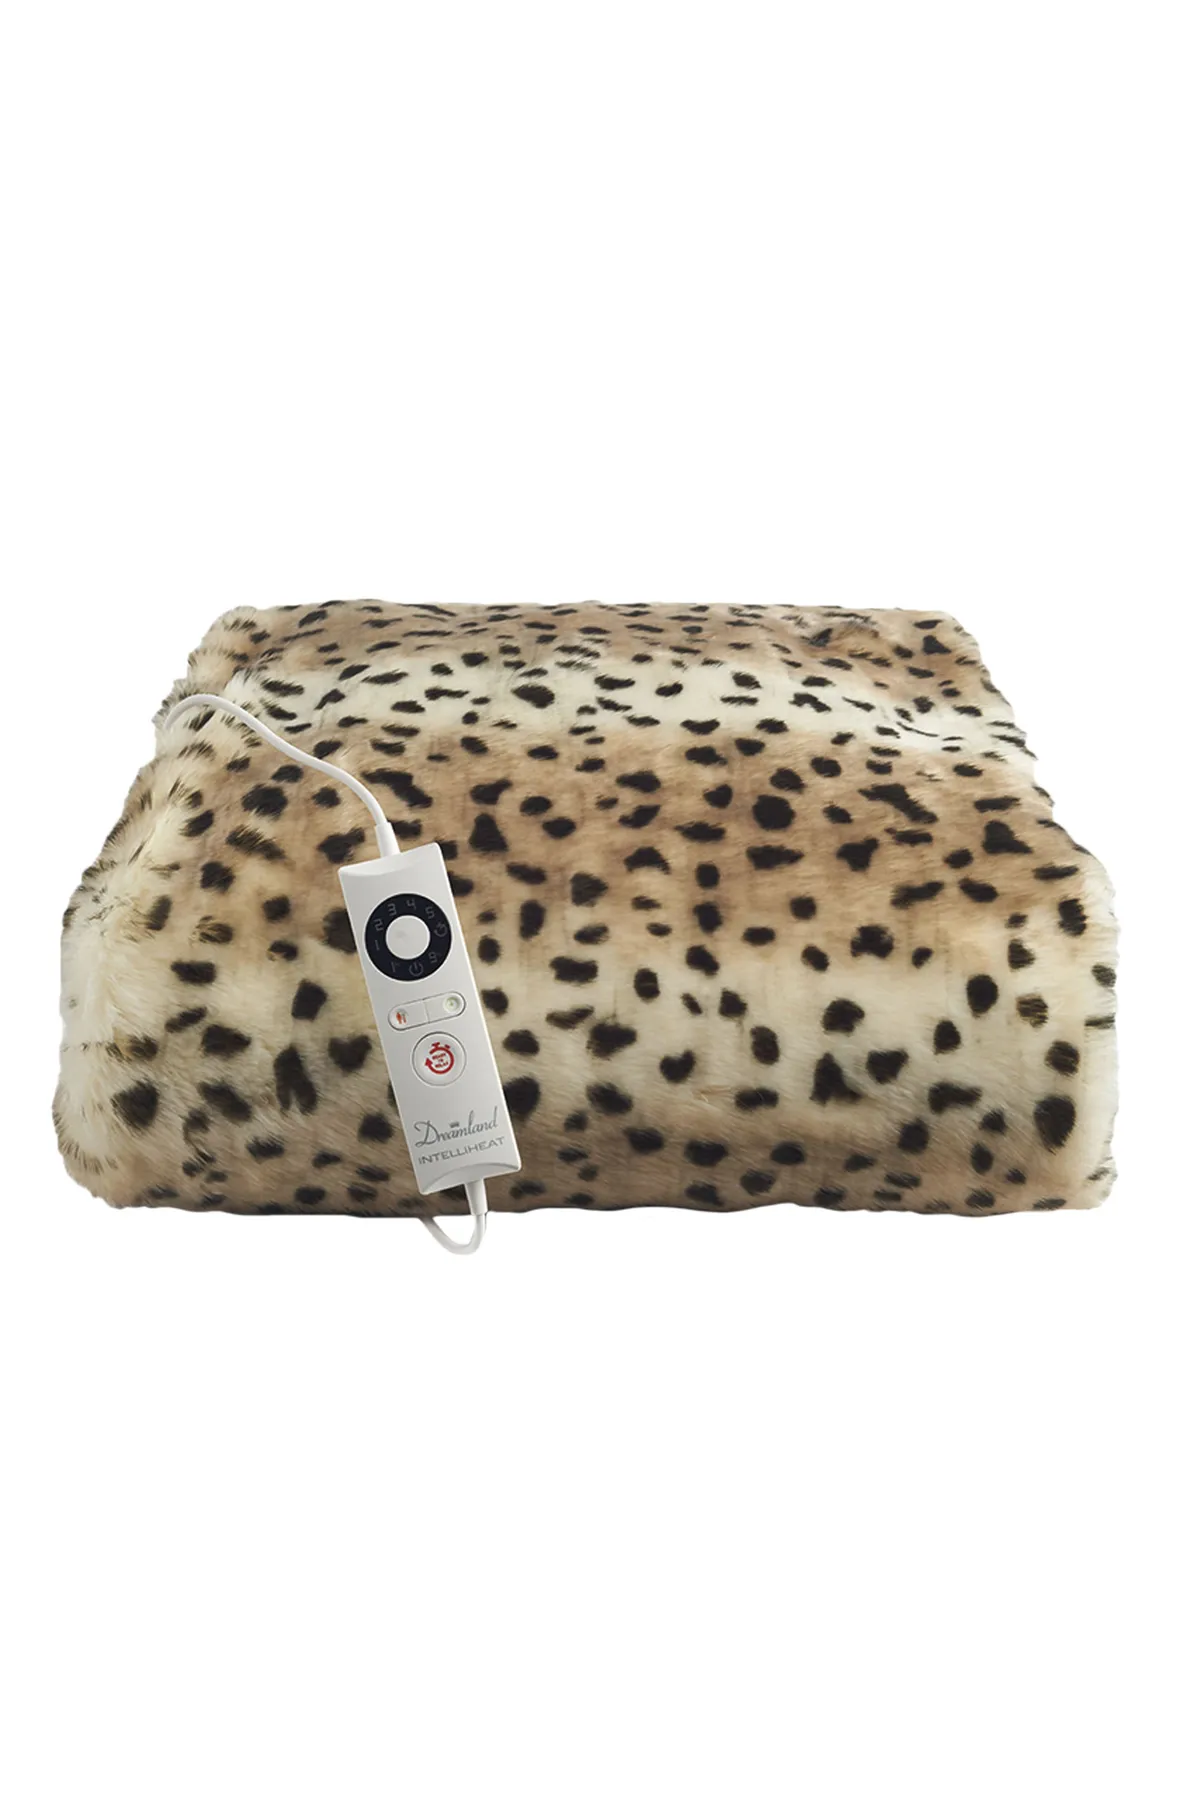 Deluxe faux fur heated leopard throw, £119, Dreamland